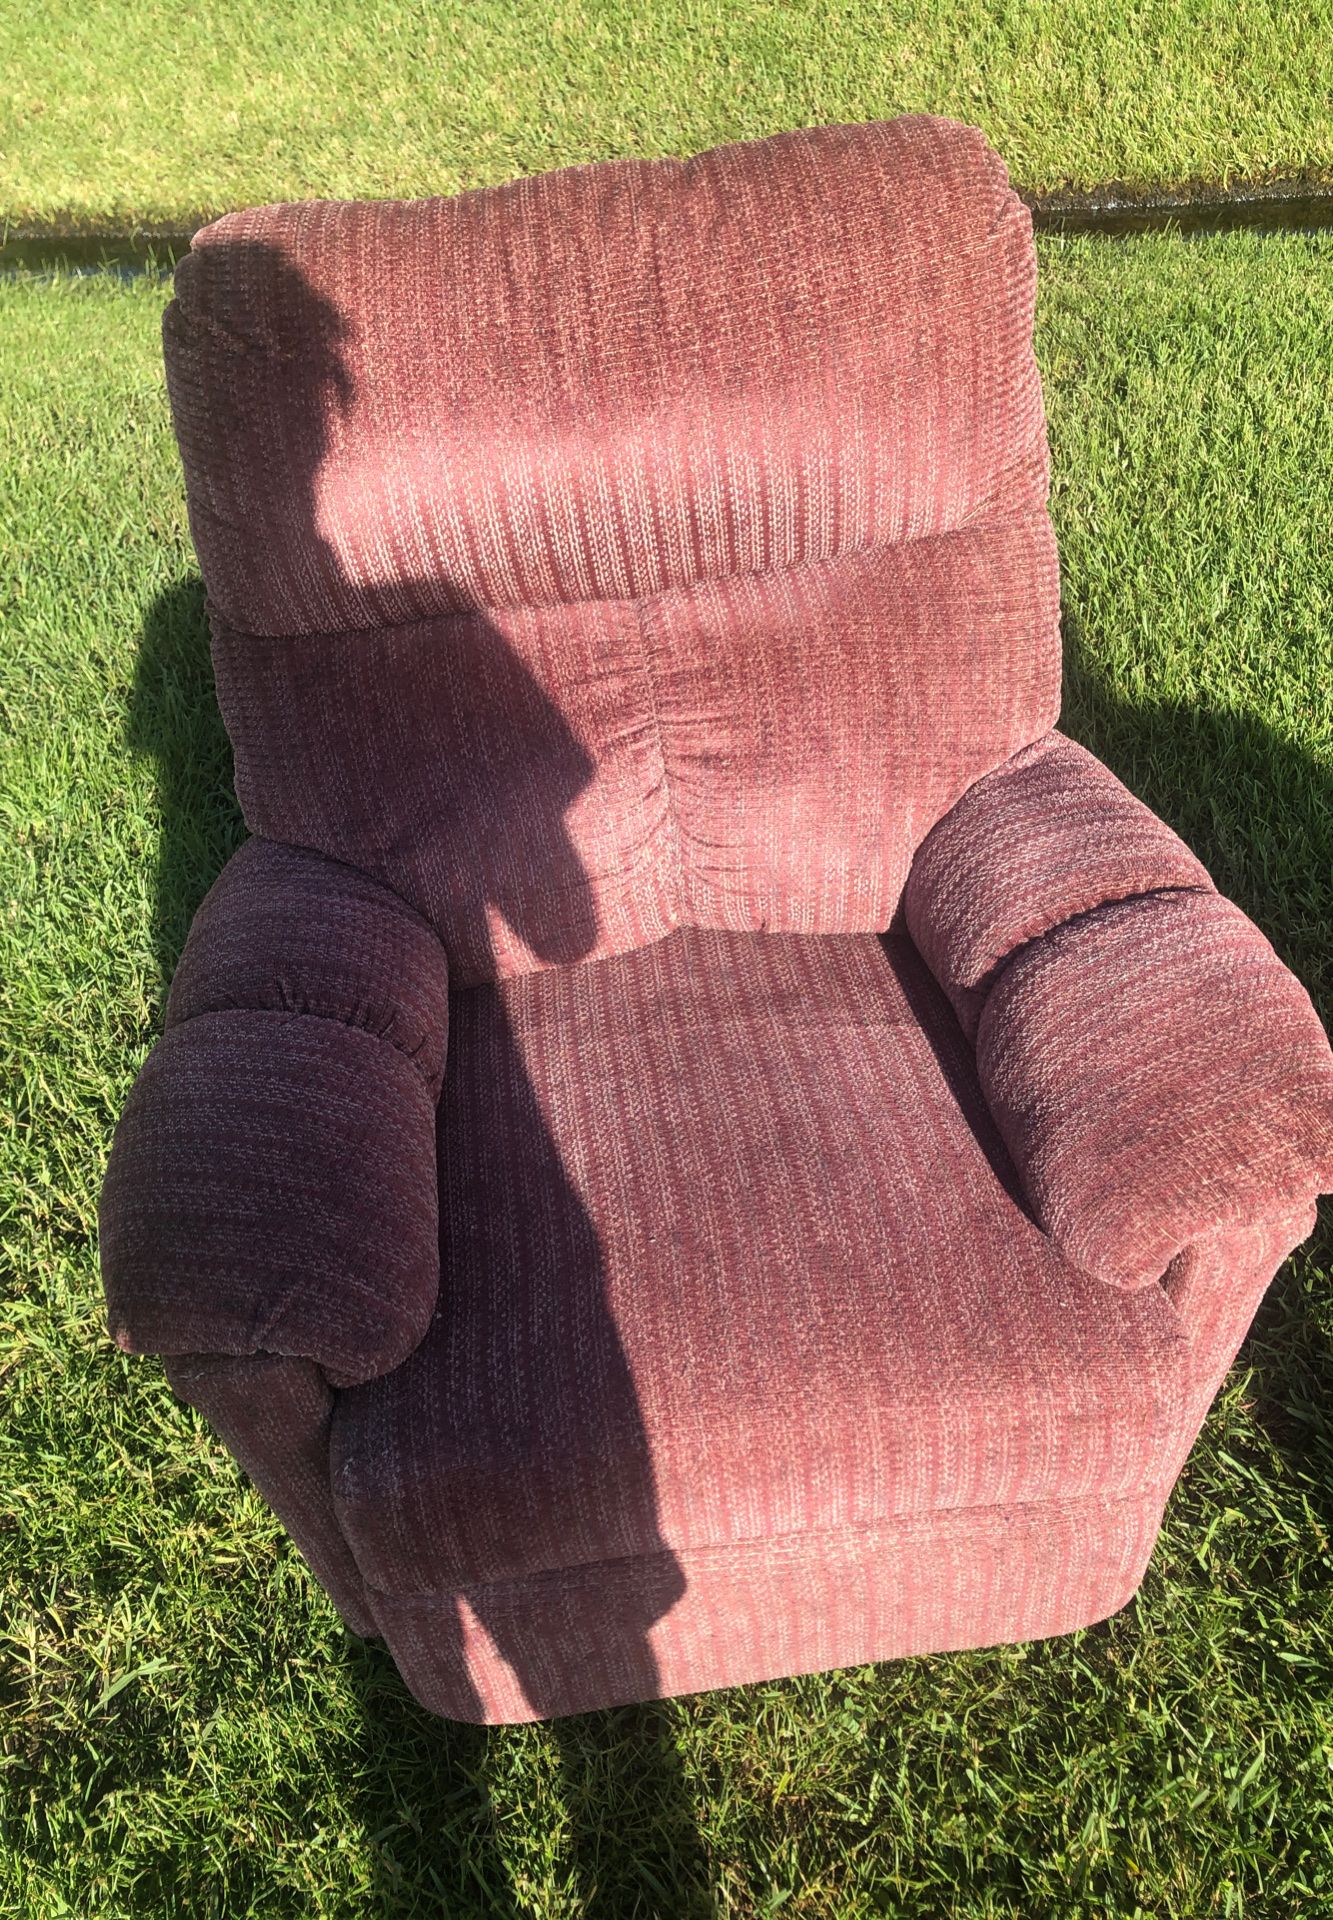 lounge chair recliner will help load